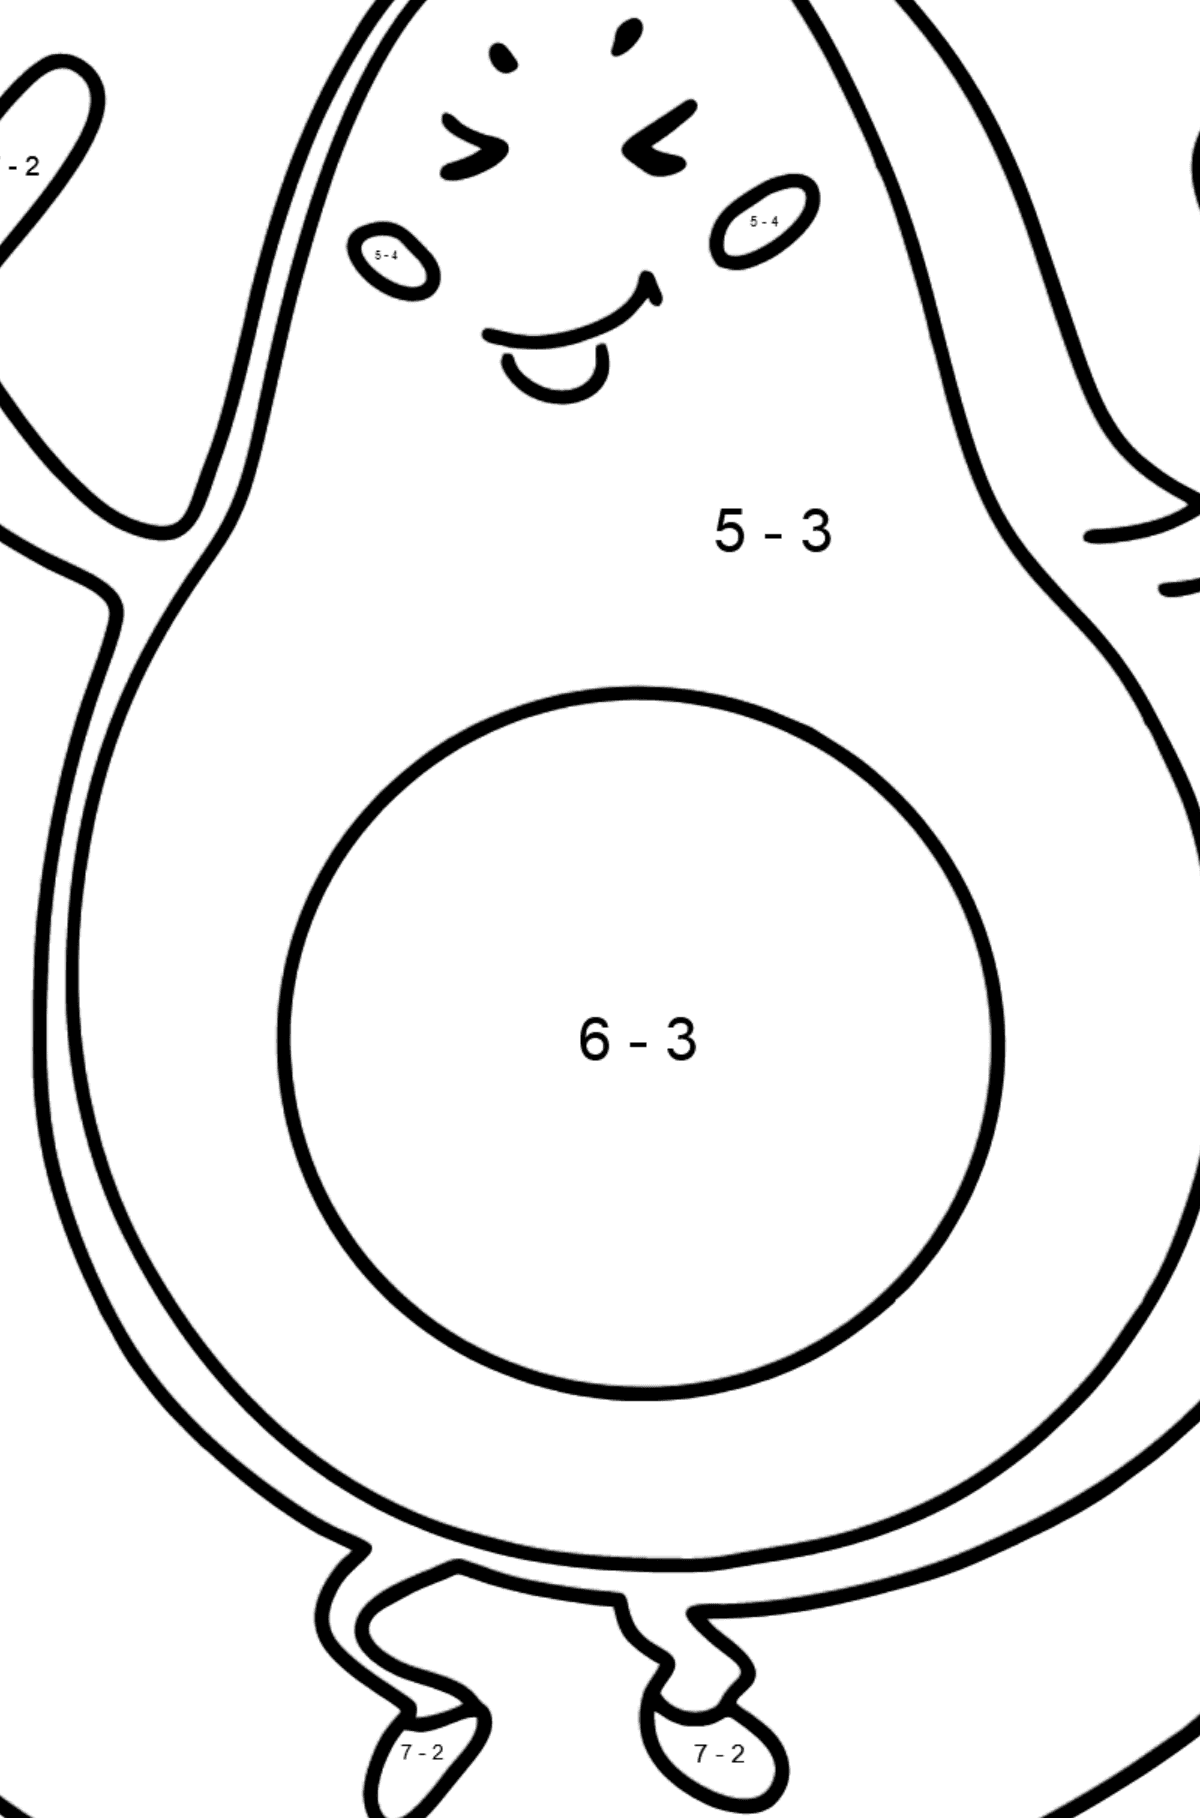 Avocado Gymnast coloring page - Math Coloring - Subtraction for Kids